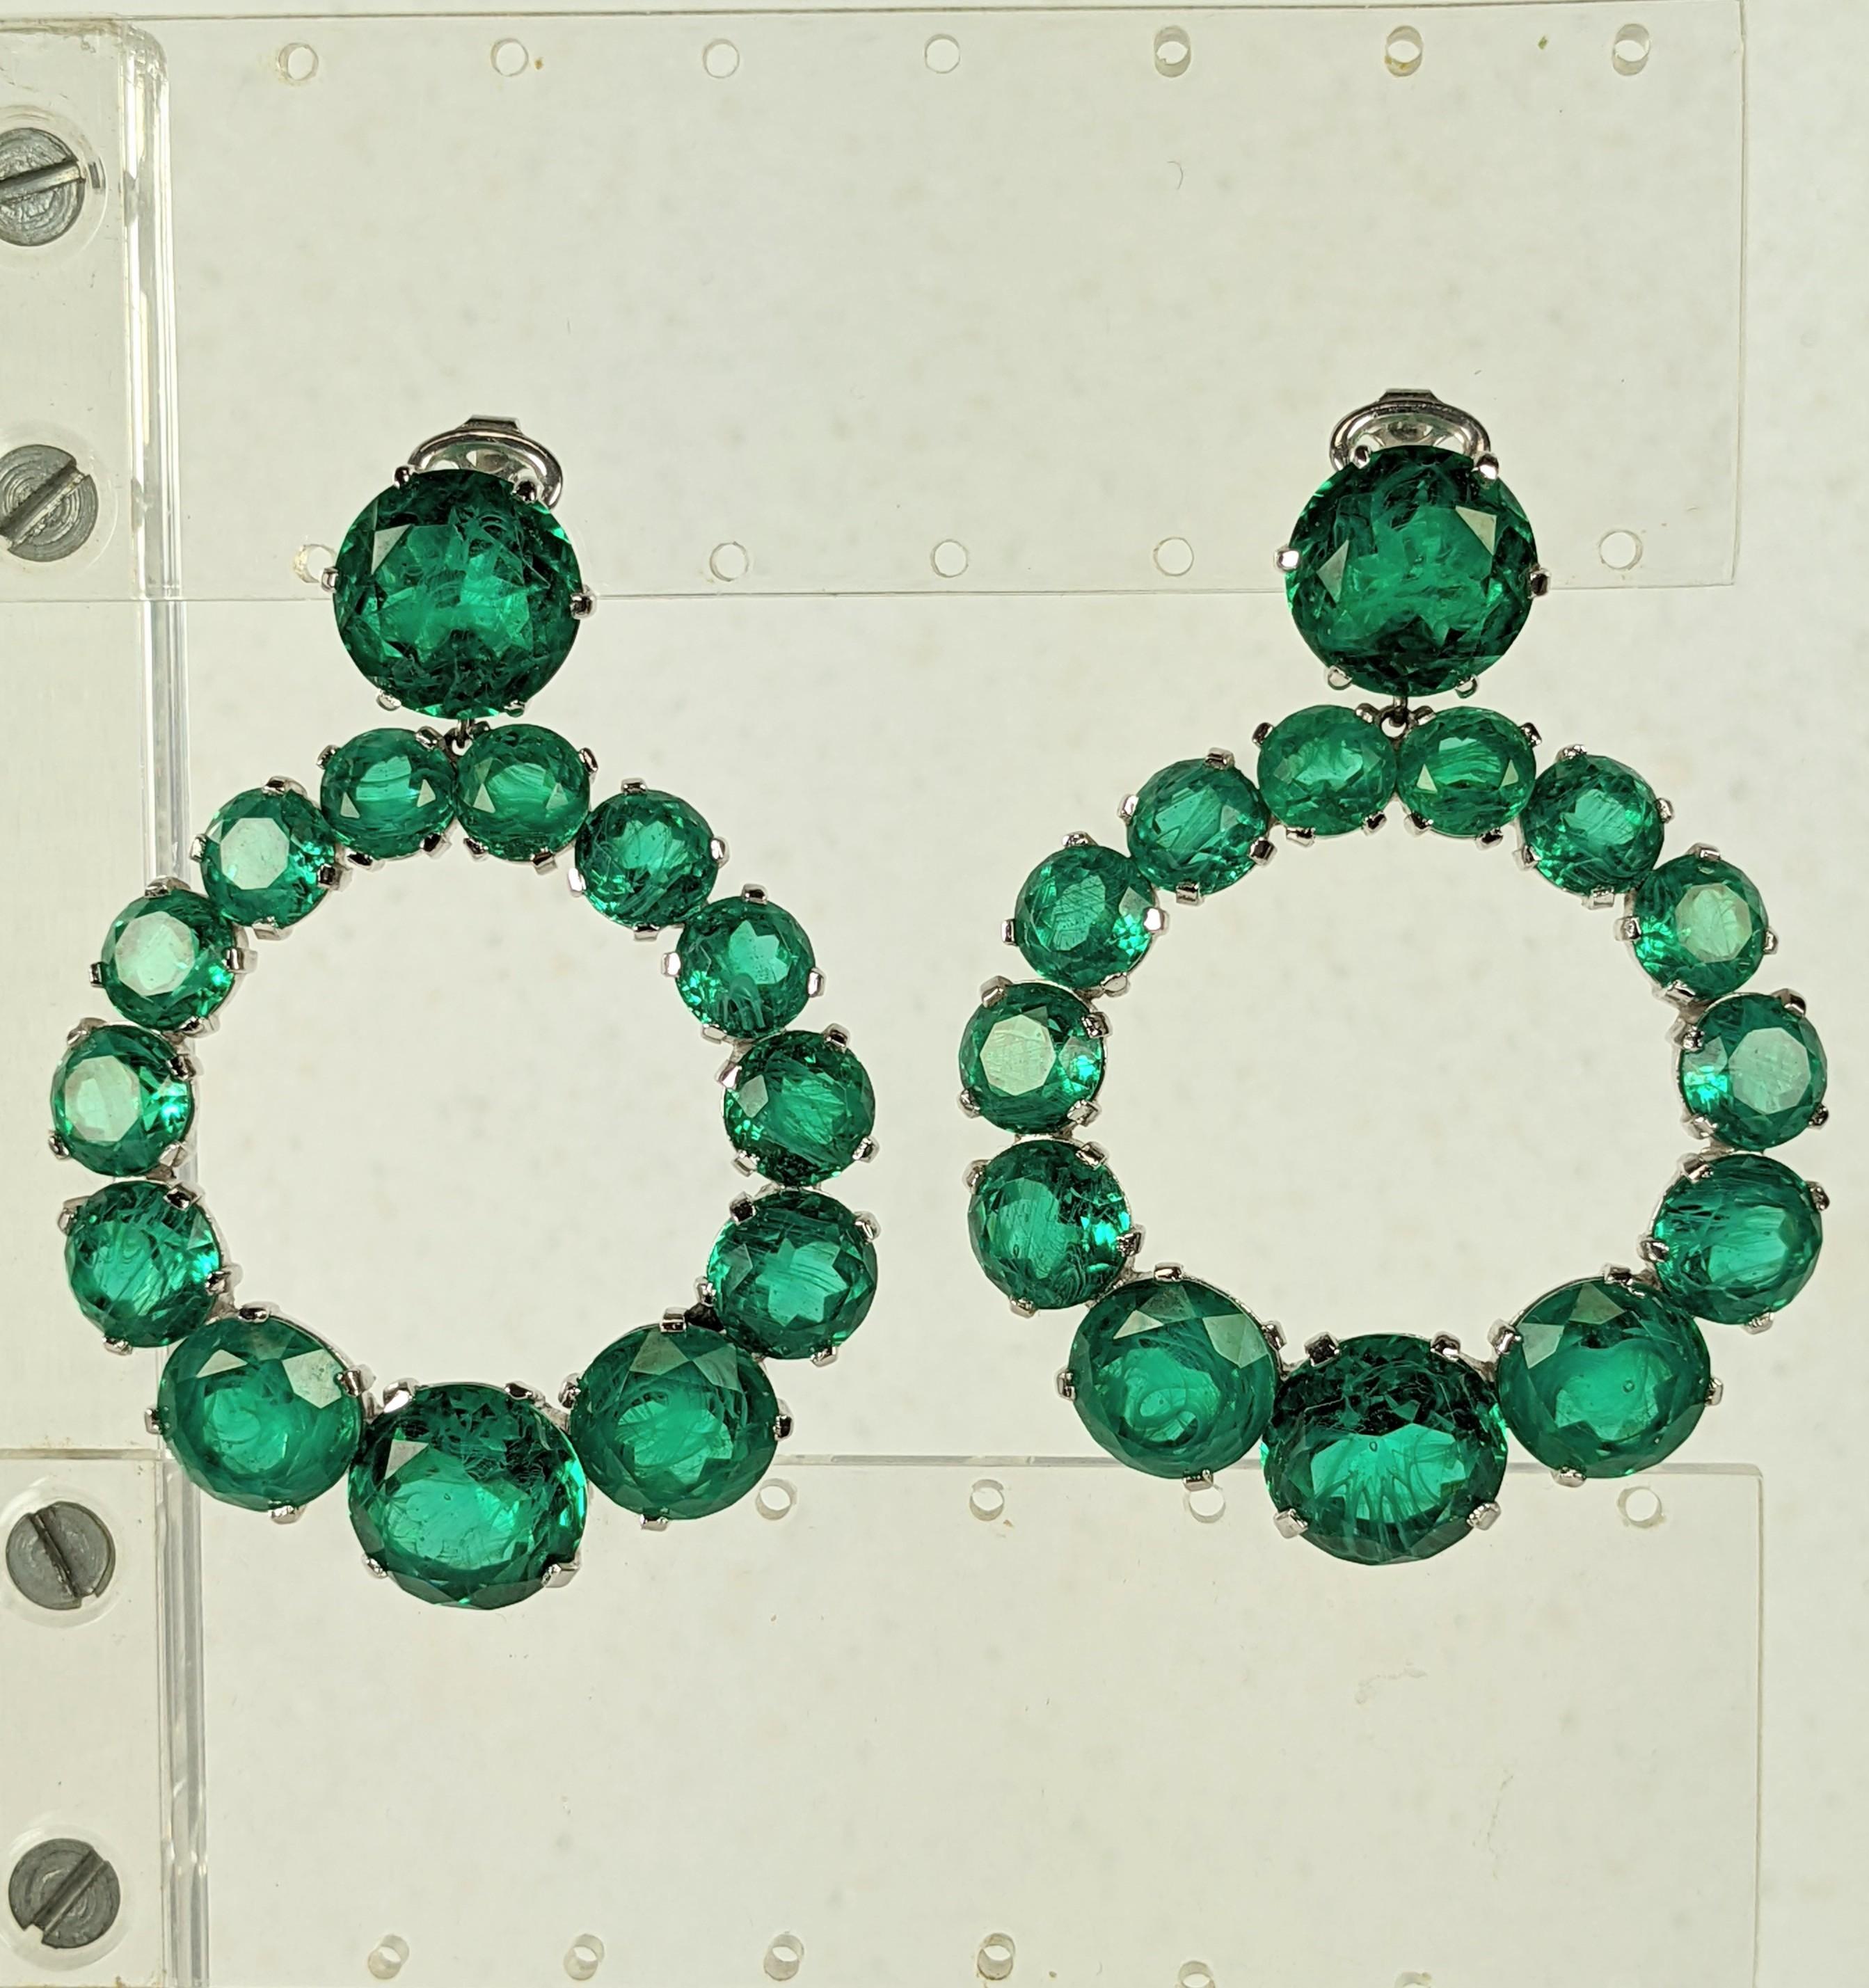 Exceptional Trifari Faux Emerald Hoop Earrings from the 1960's. Finest quality faux jewelry by the best maker of the period with glass stones simulating flawed emeralds in graduated sizes.
Clip back fittings, super striking scale and quality. 2.5